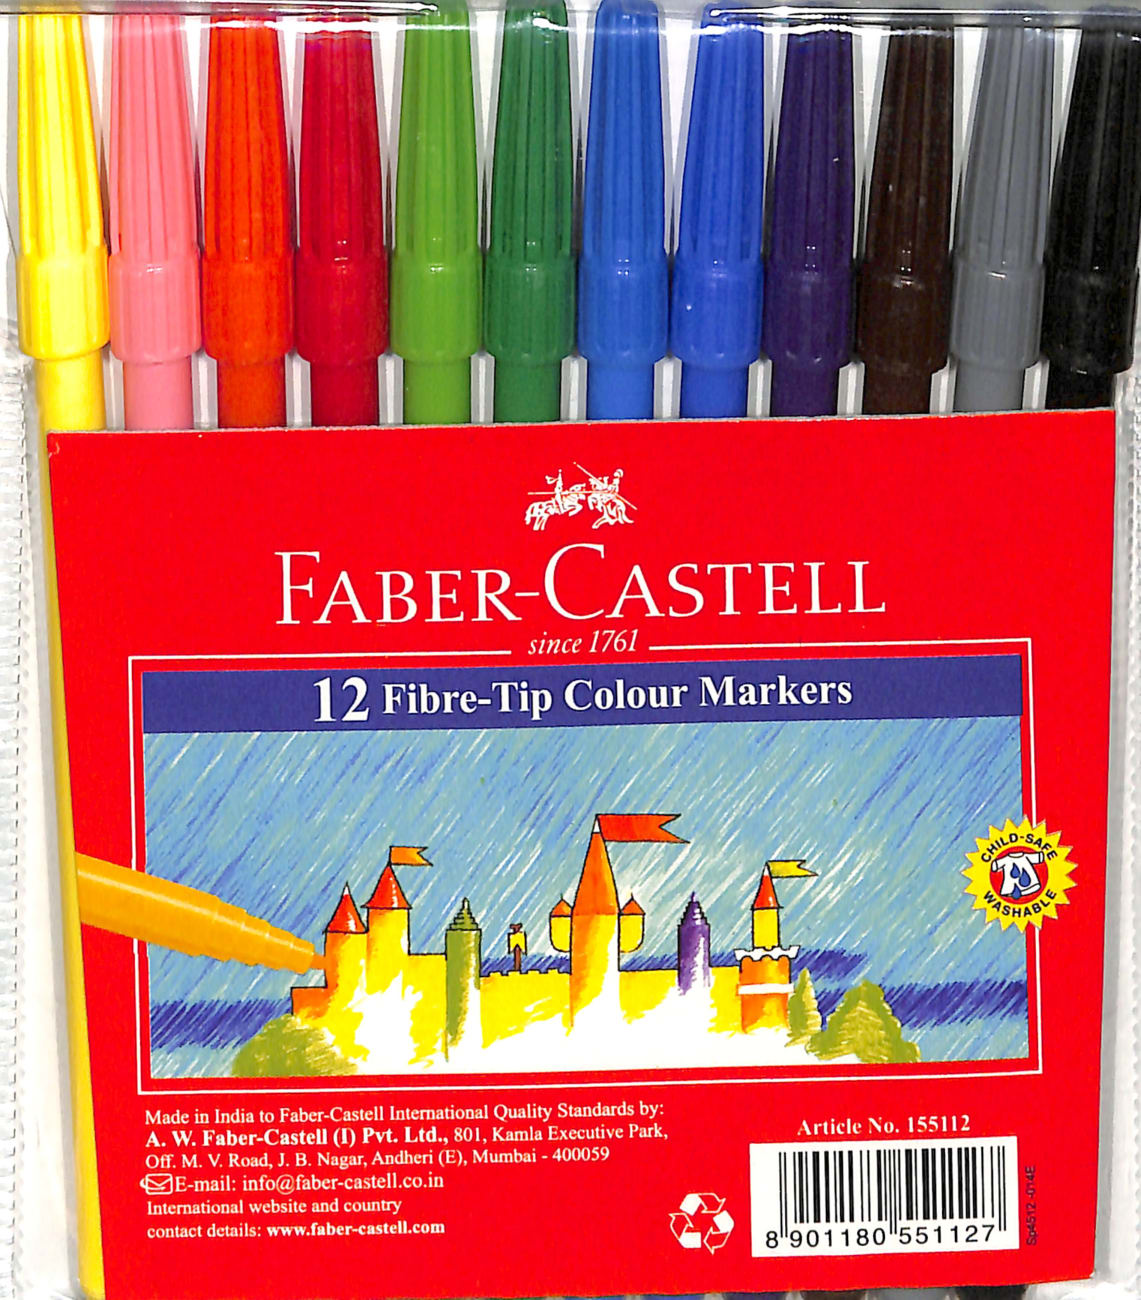 Faber-Castell Fibre-Tip Colour Markers Wallet of 12 Stationery